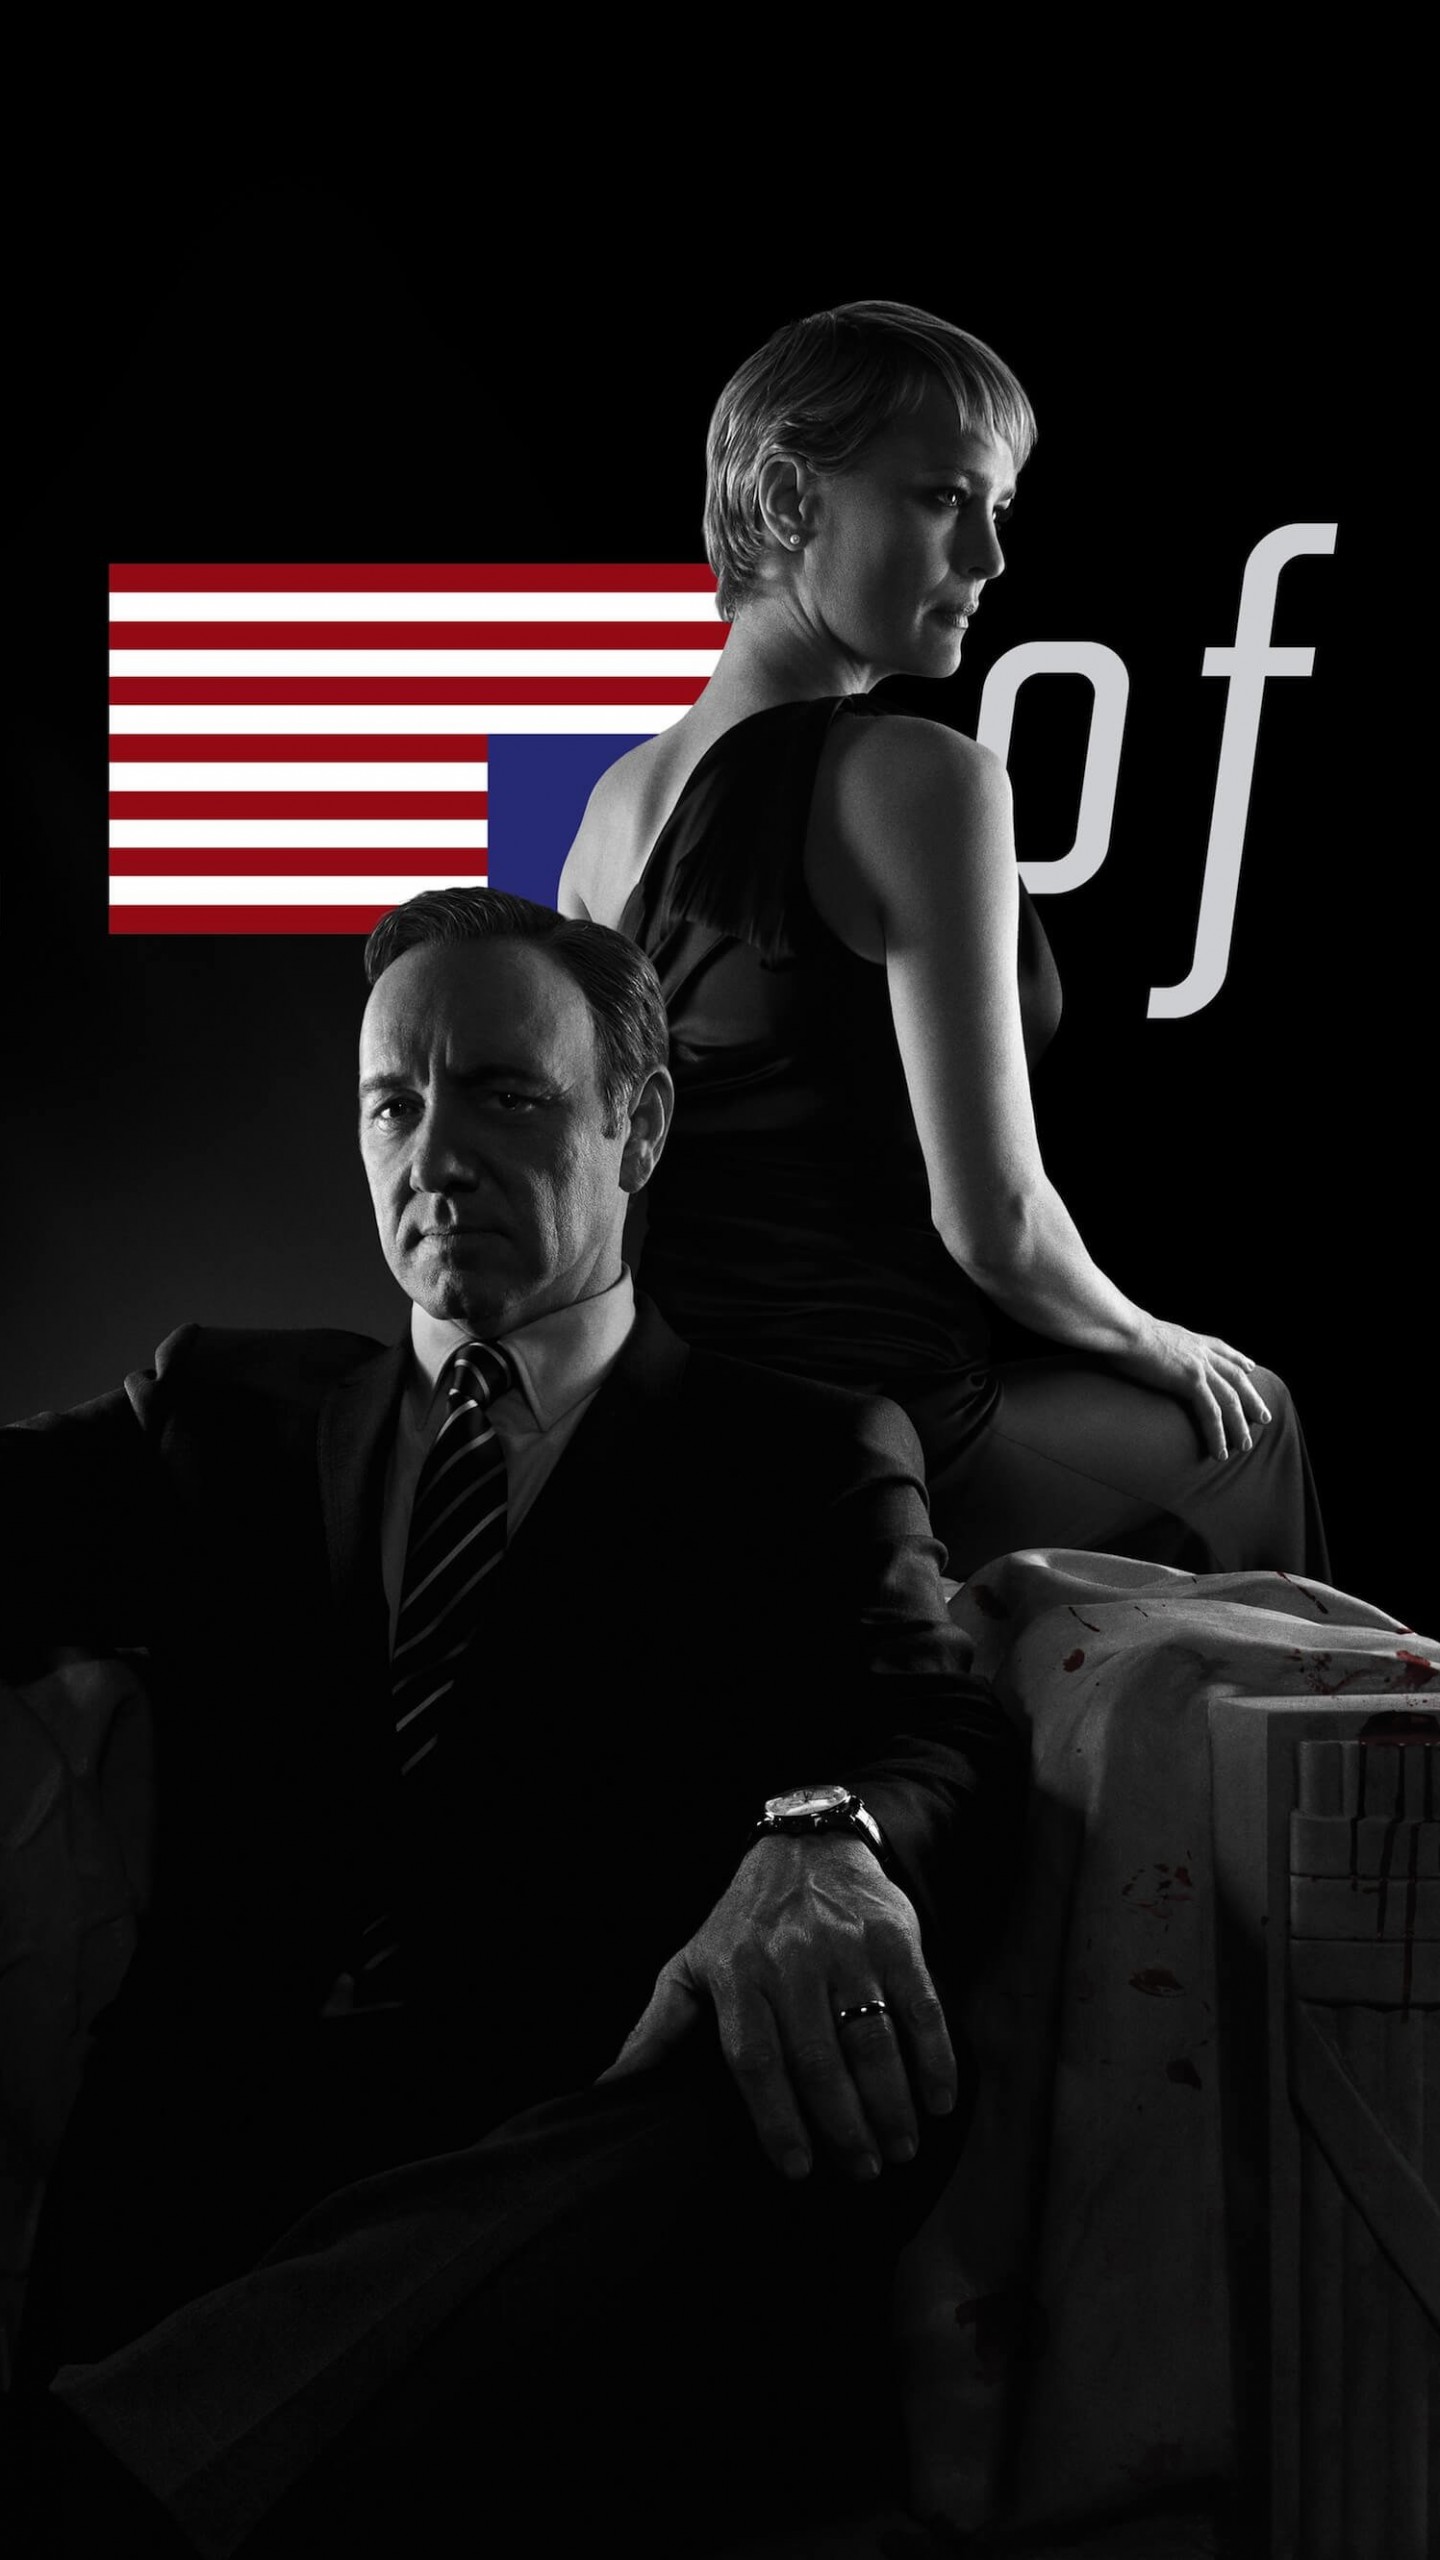 House of Cards - Black & White Wallpaper for SAMSUNG Galaxy S6